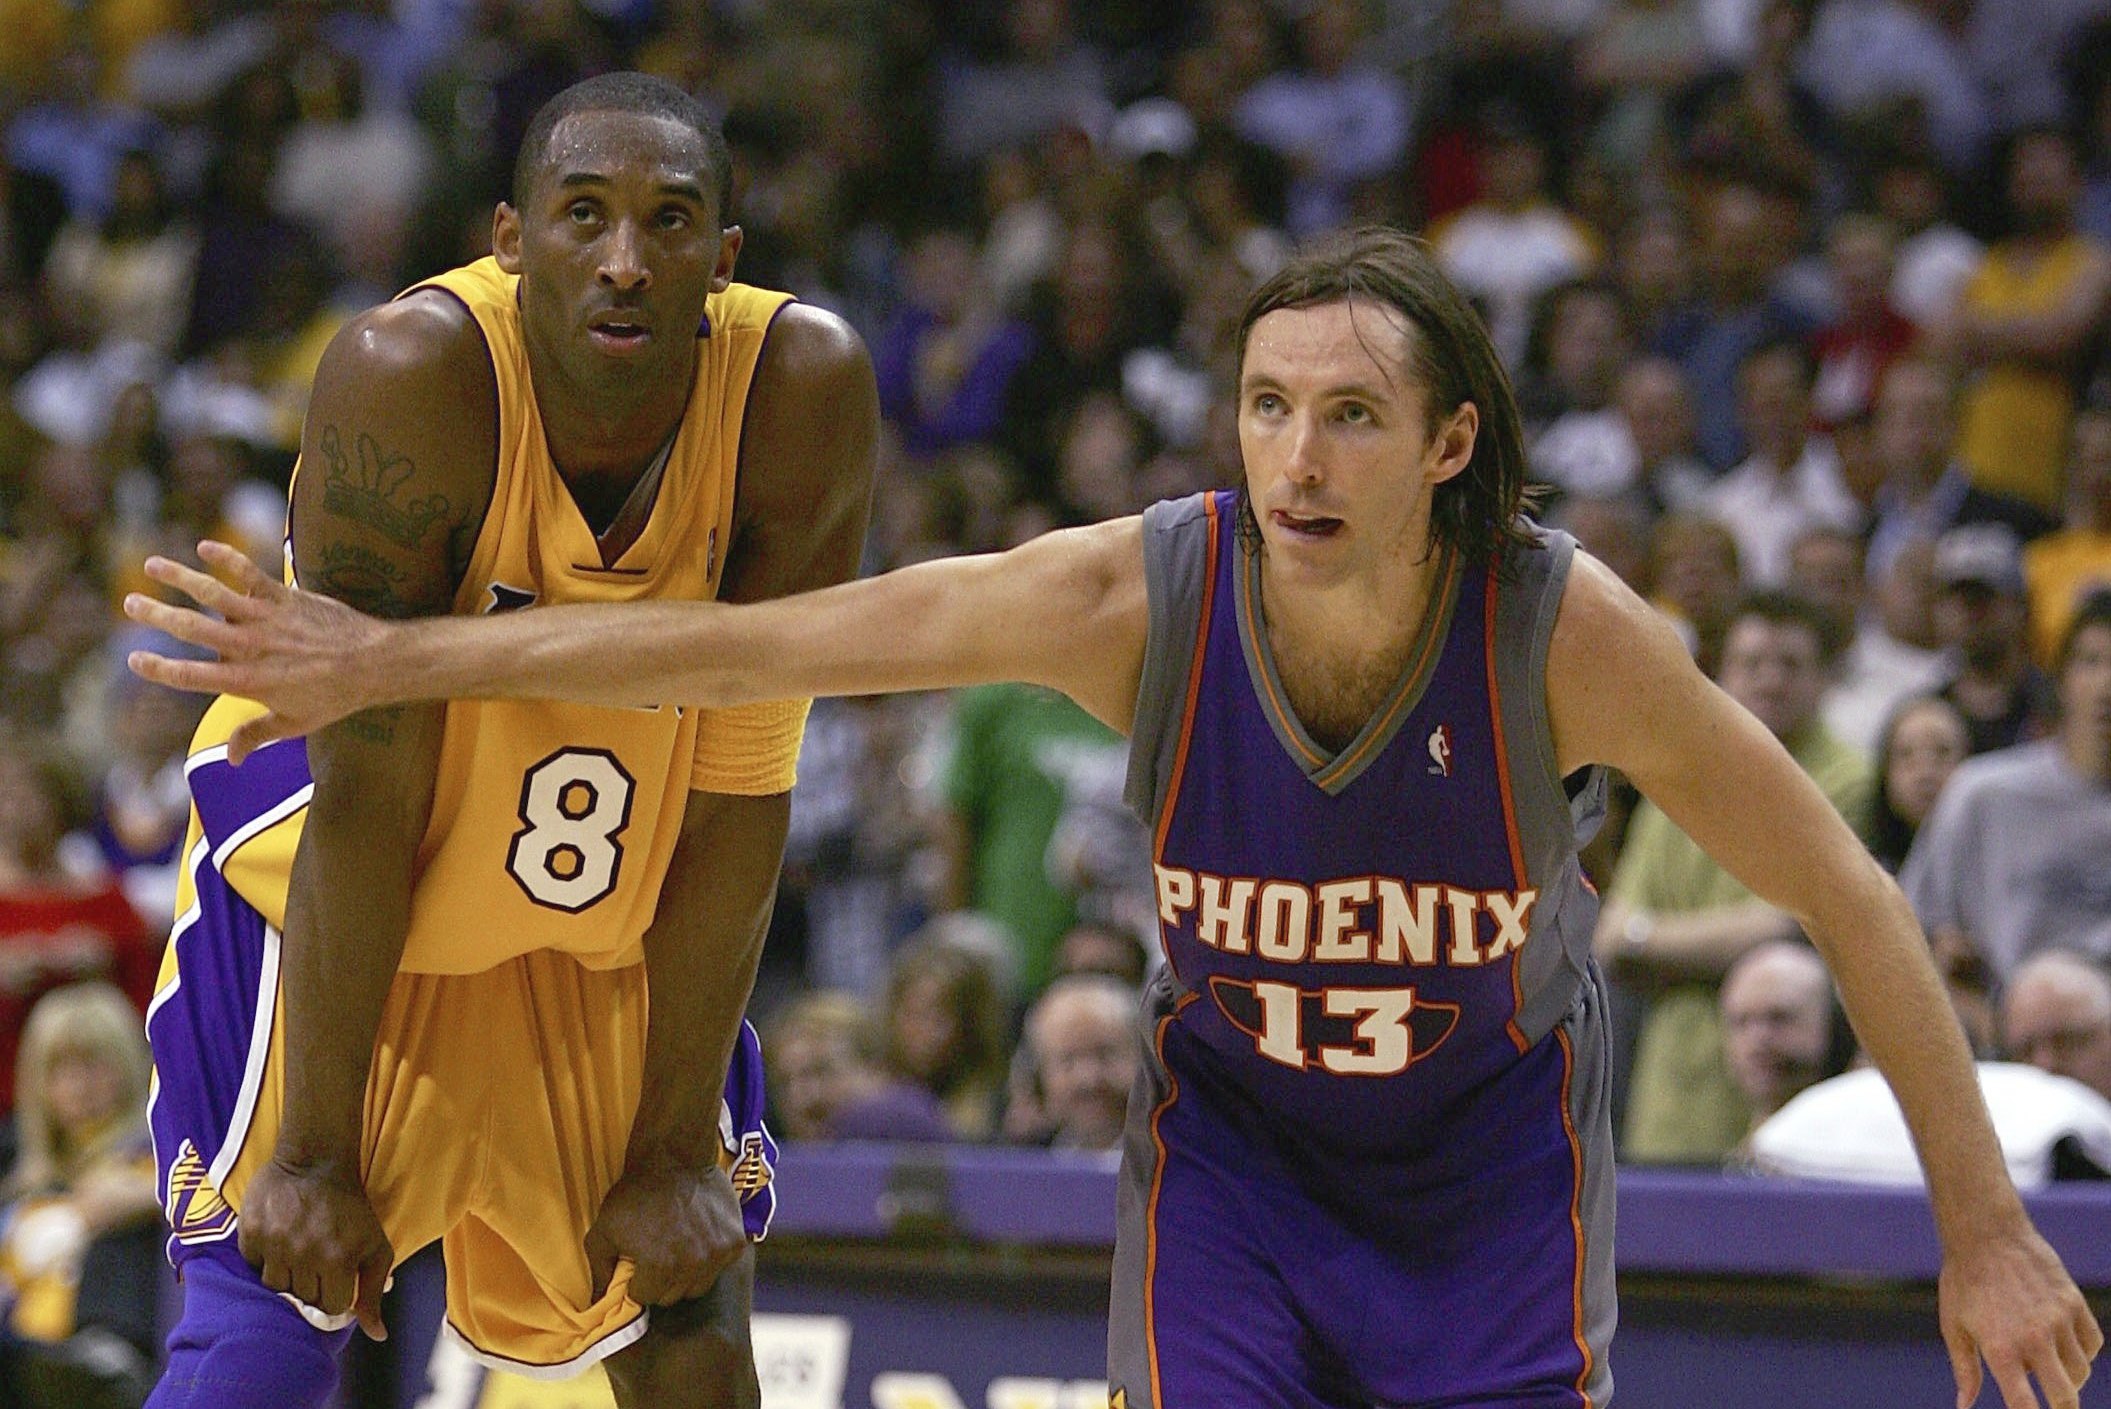 The Story Of 2004 Los Angeles Lakers Superteam And Why They Didn't